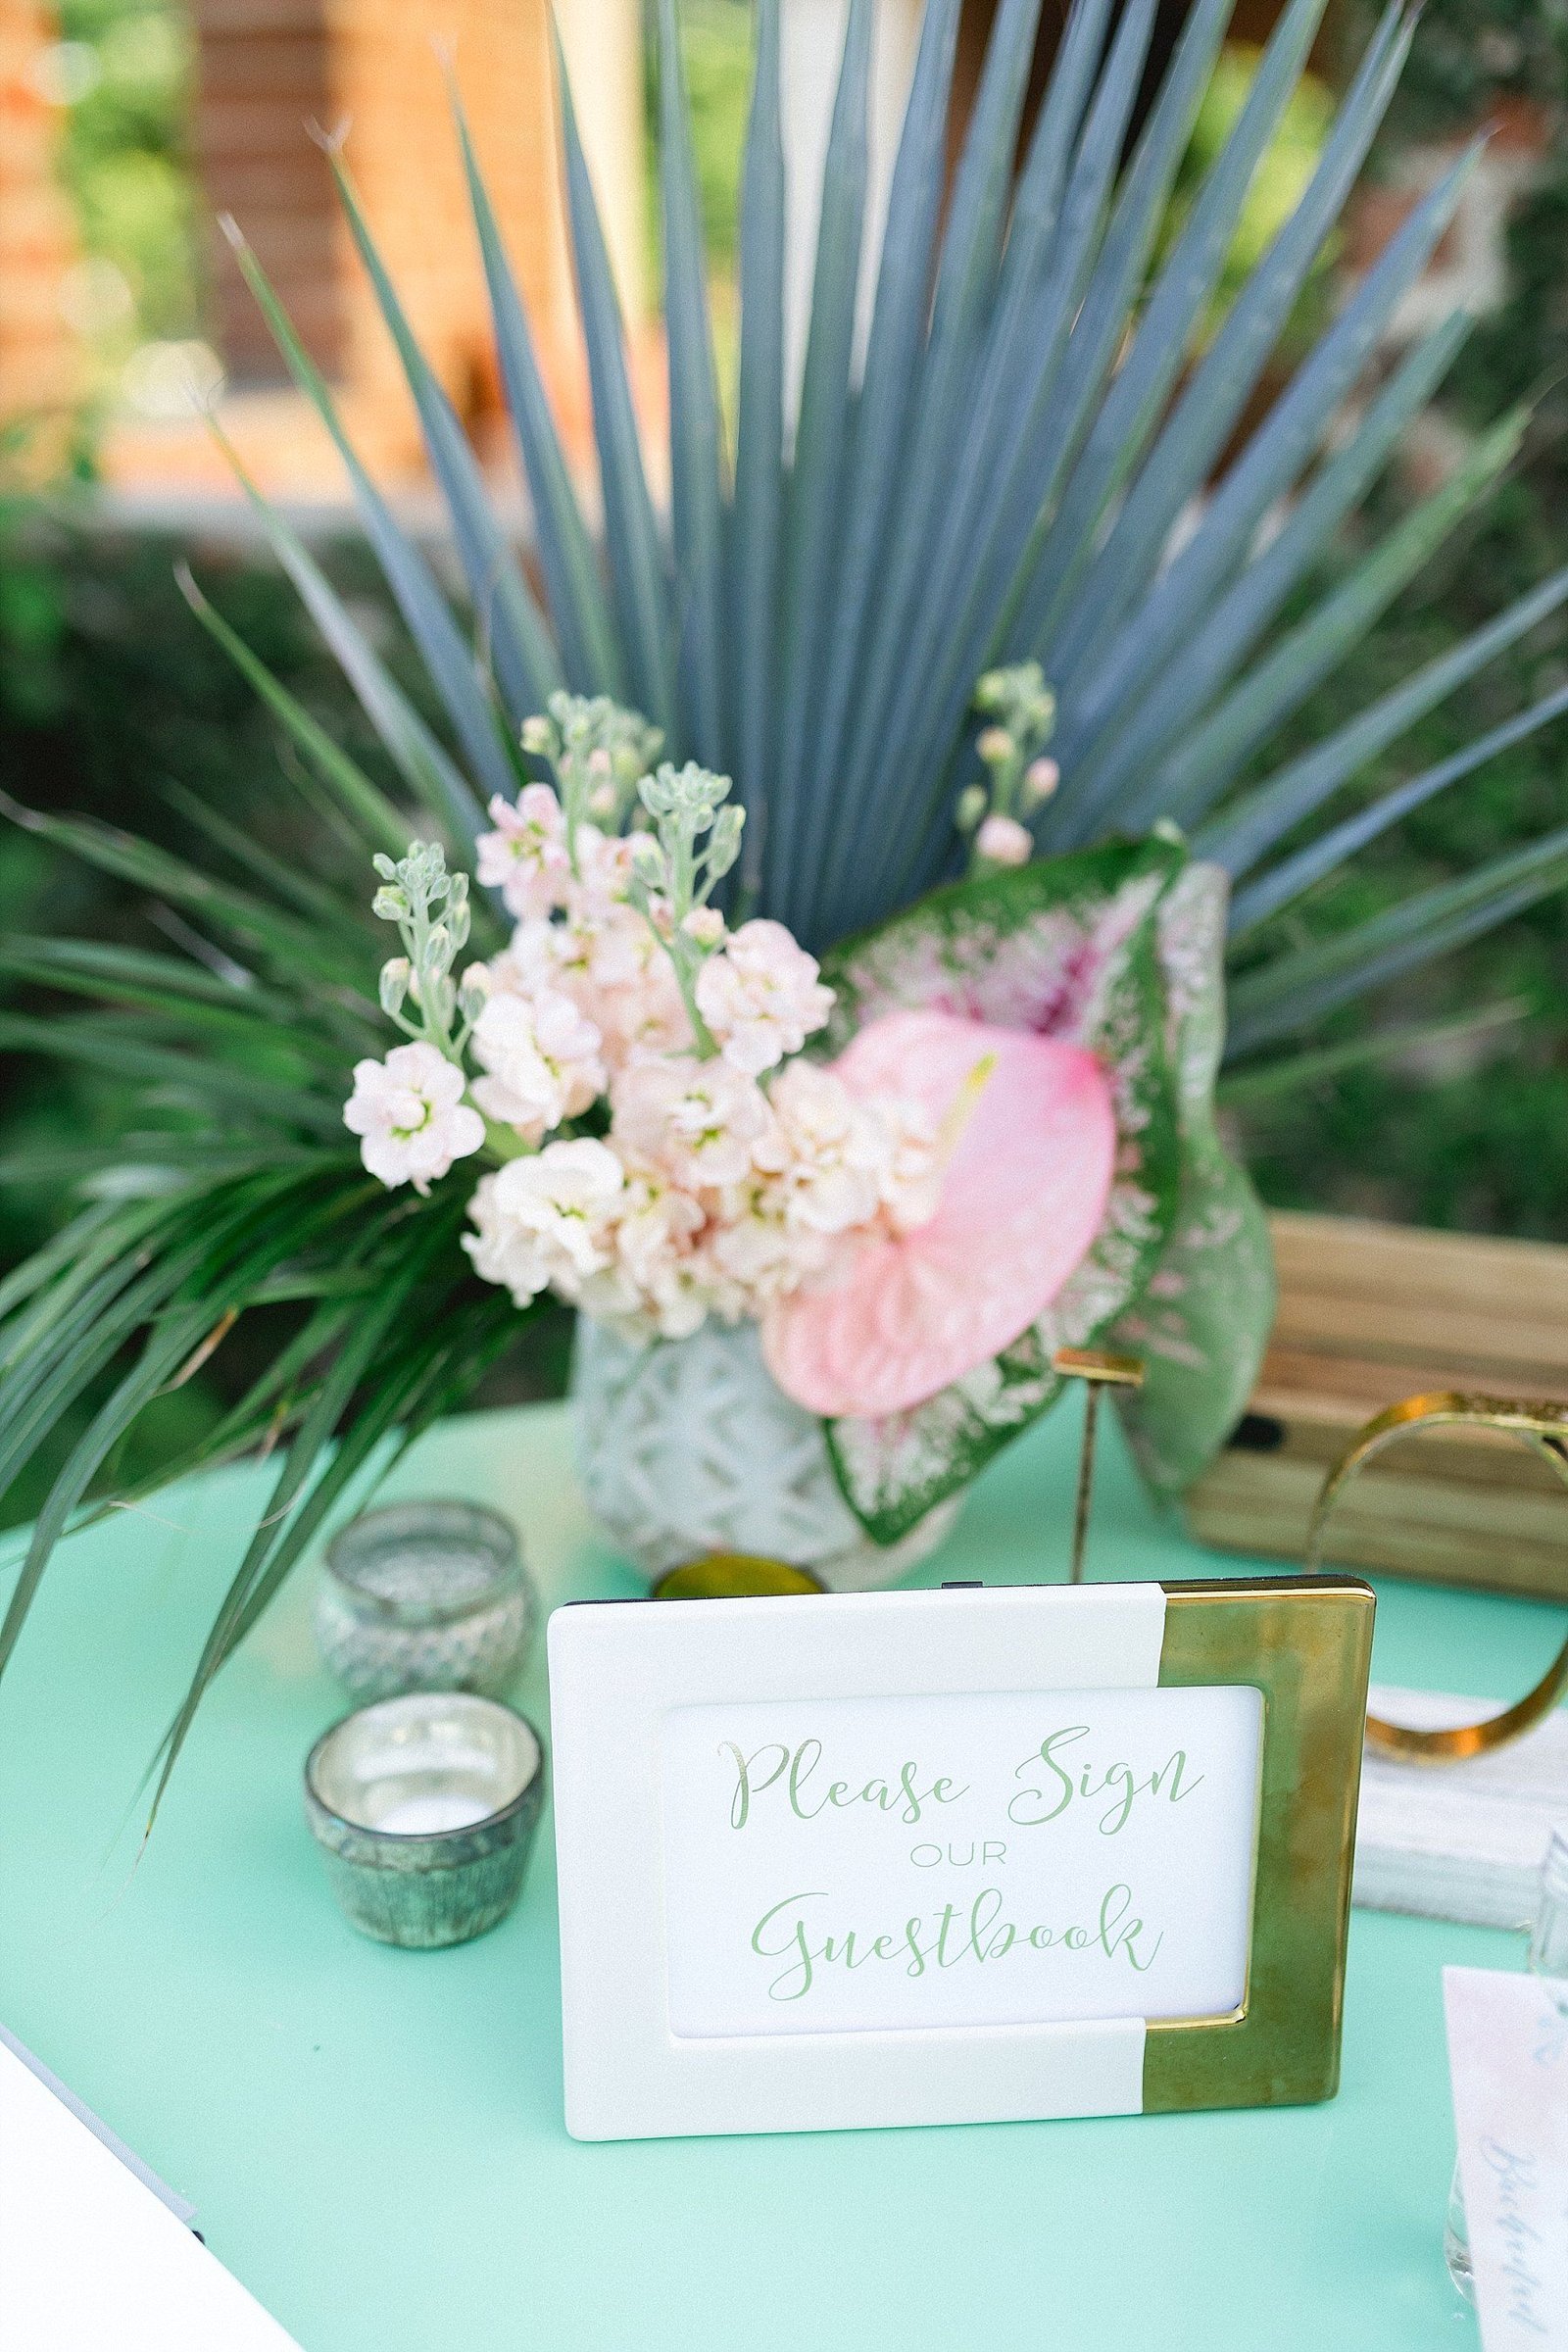 Guest signing book table with a floral arrangement. The Wedding took place at Flora Farms in Los Cabos, Mexico. Wedding Planning by Cabo Wedding Services. Photography by Sara Richardson